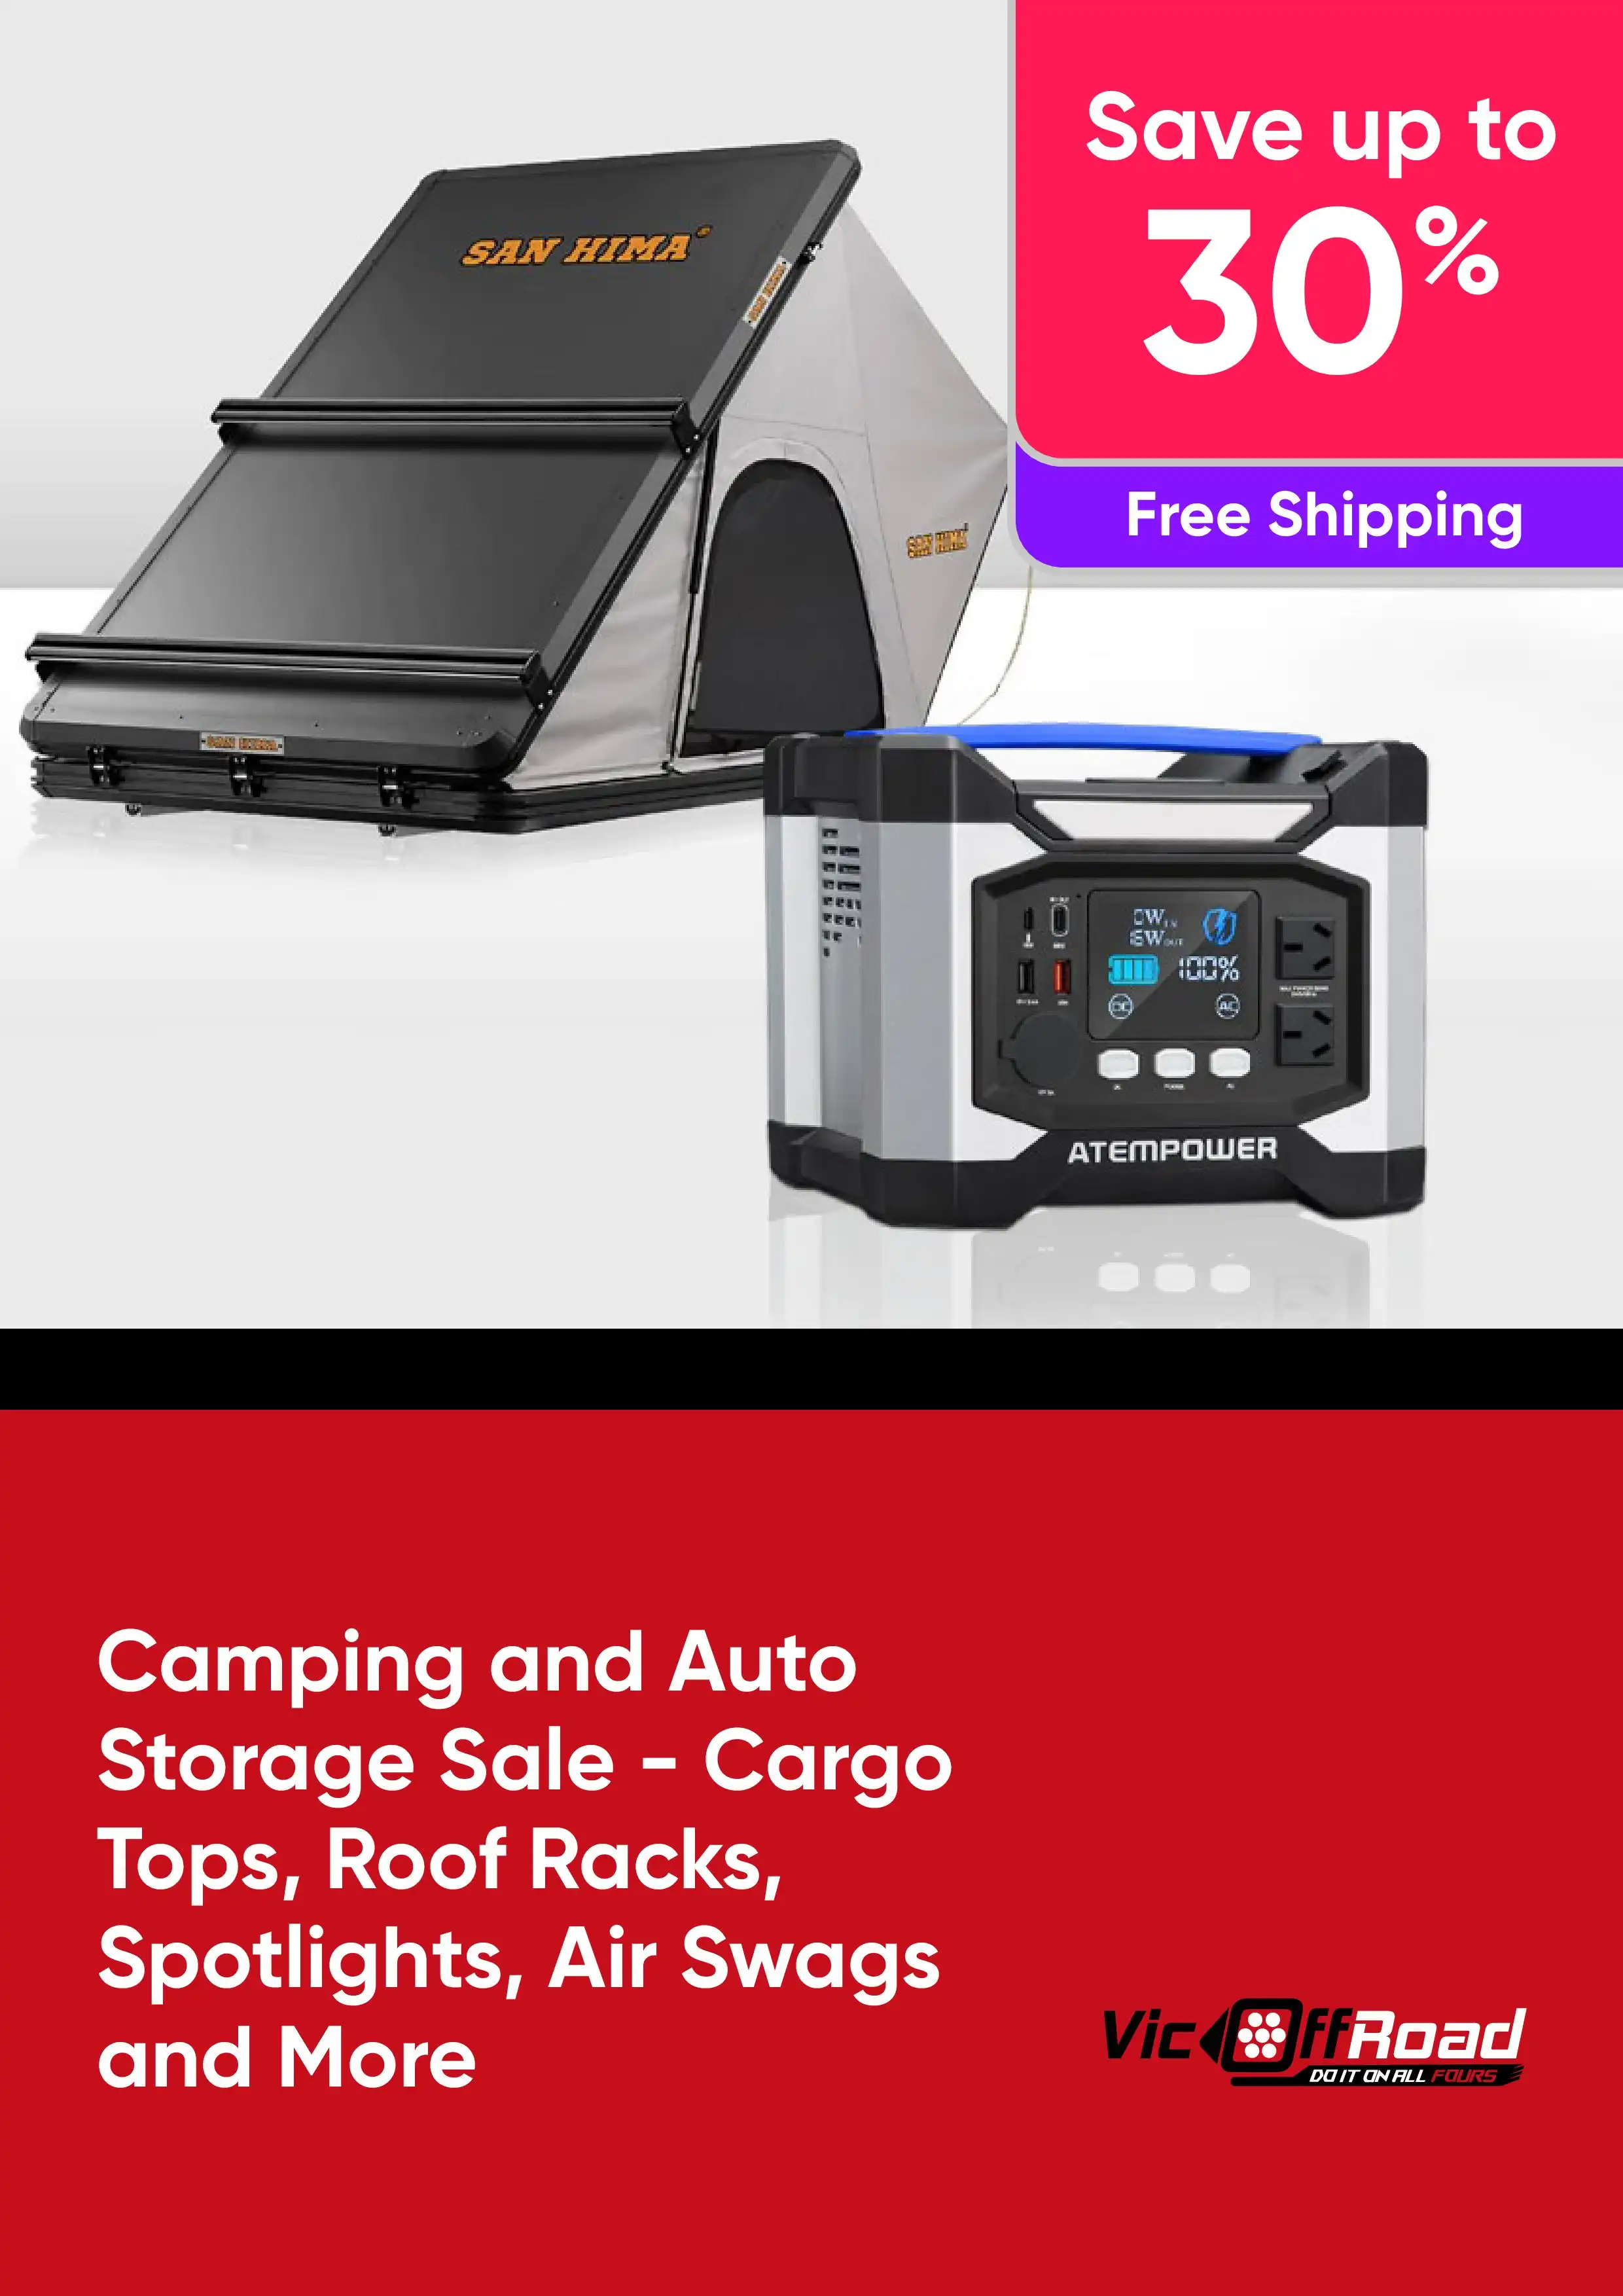 Camping and Auto Storage Sale - Cargo Tops, Roof Racks, Spotlights, Air Swags and More - Save up to 30% off